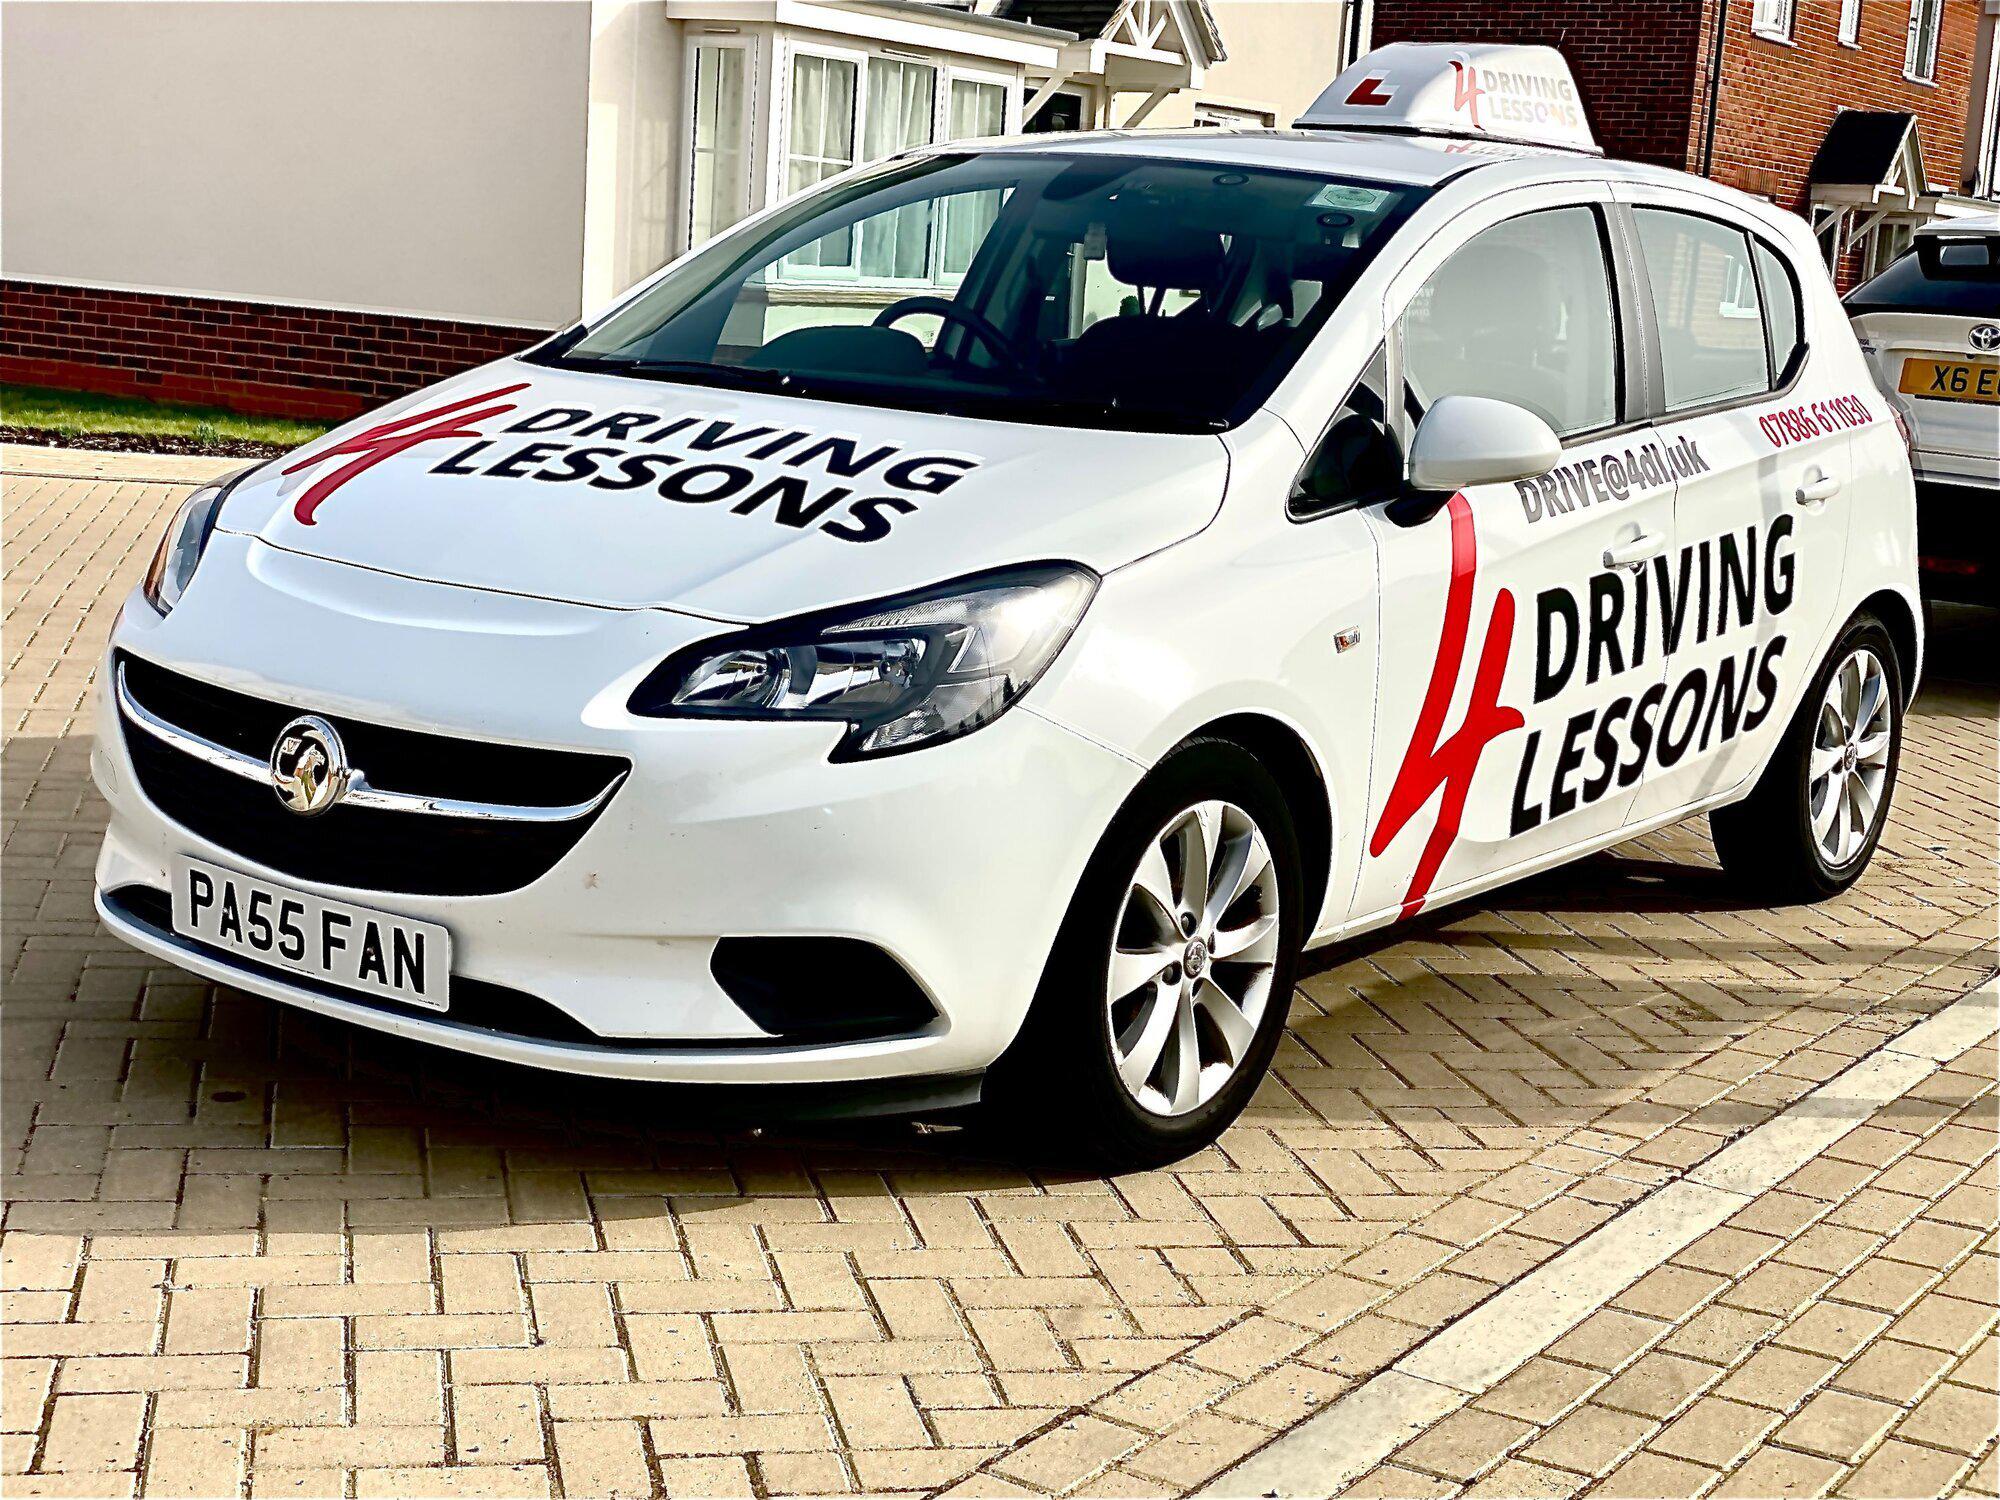 4 Driving Lessons Colchester & Clacton Clacton-On-Sea 07957 194065